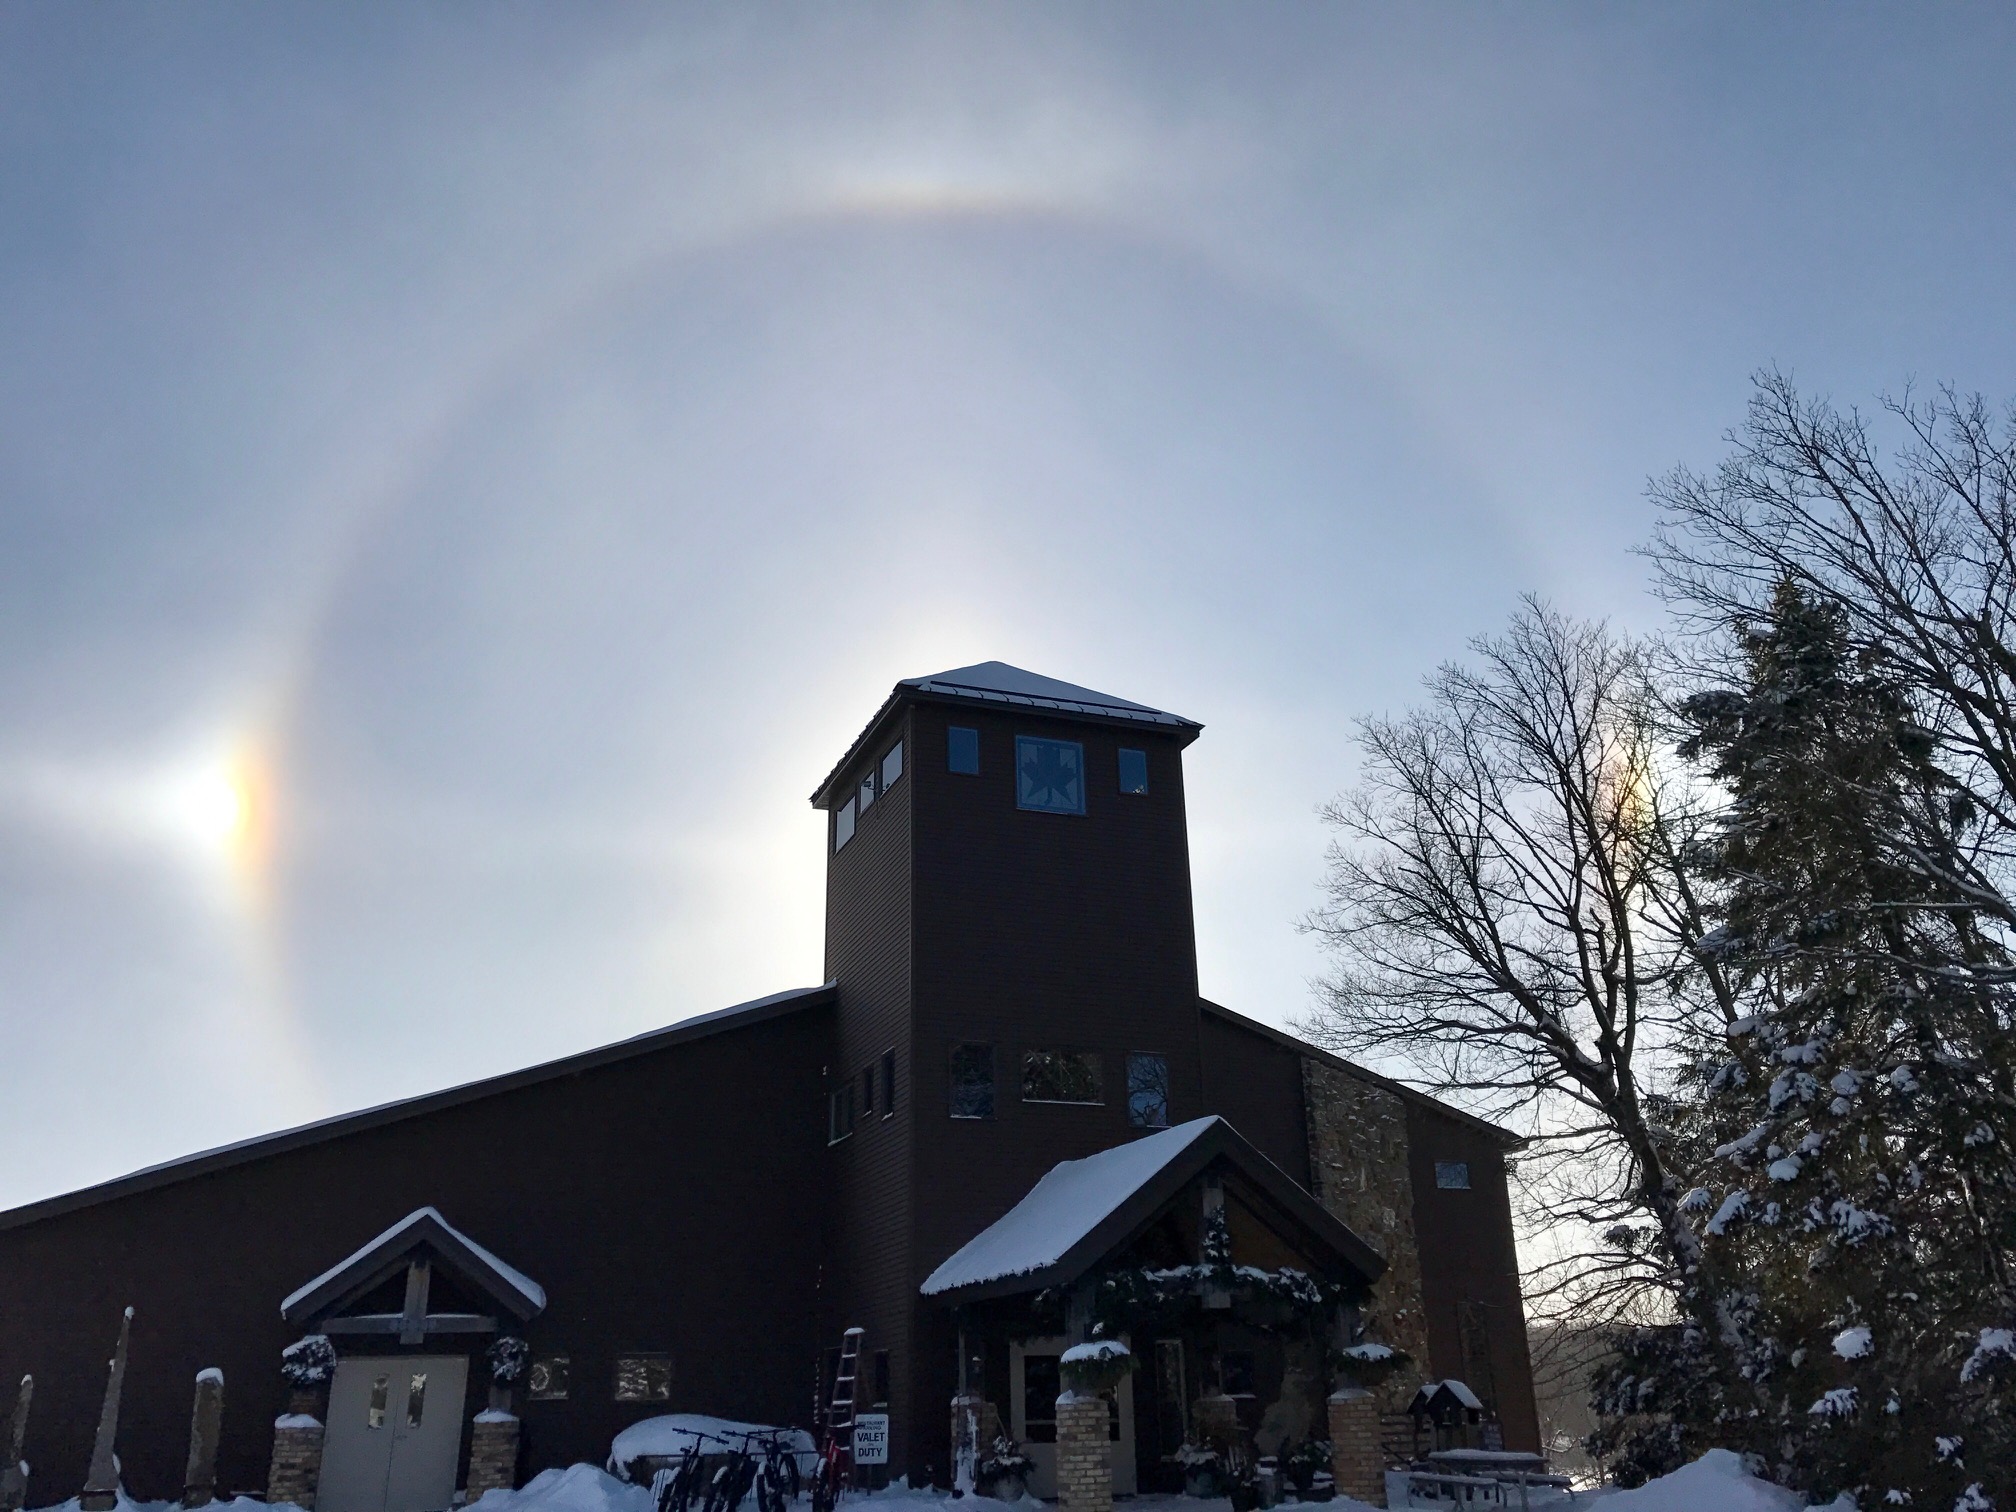 Sun dog over the lodge Wednesday afternoon. December 14th, 2016.